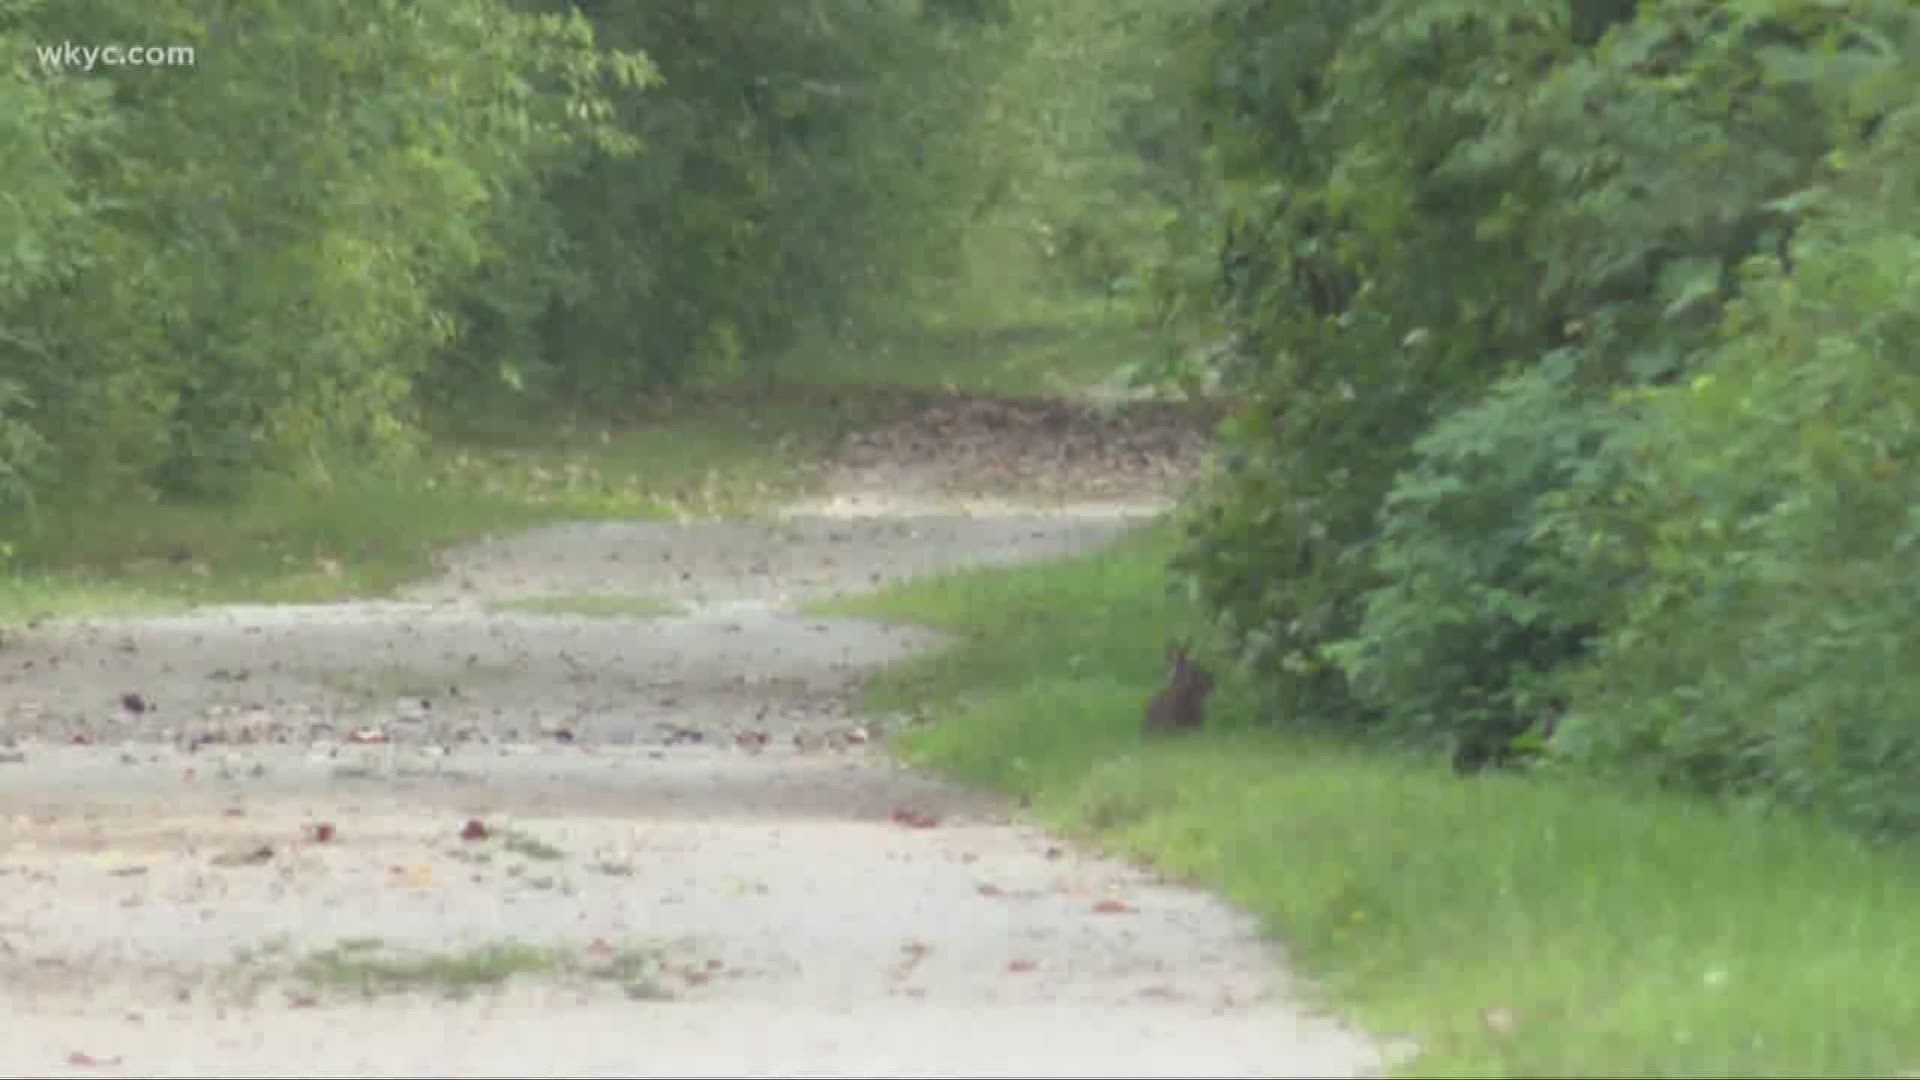 Another woman assaulted on popular nature trail